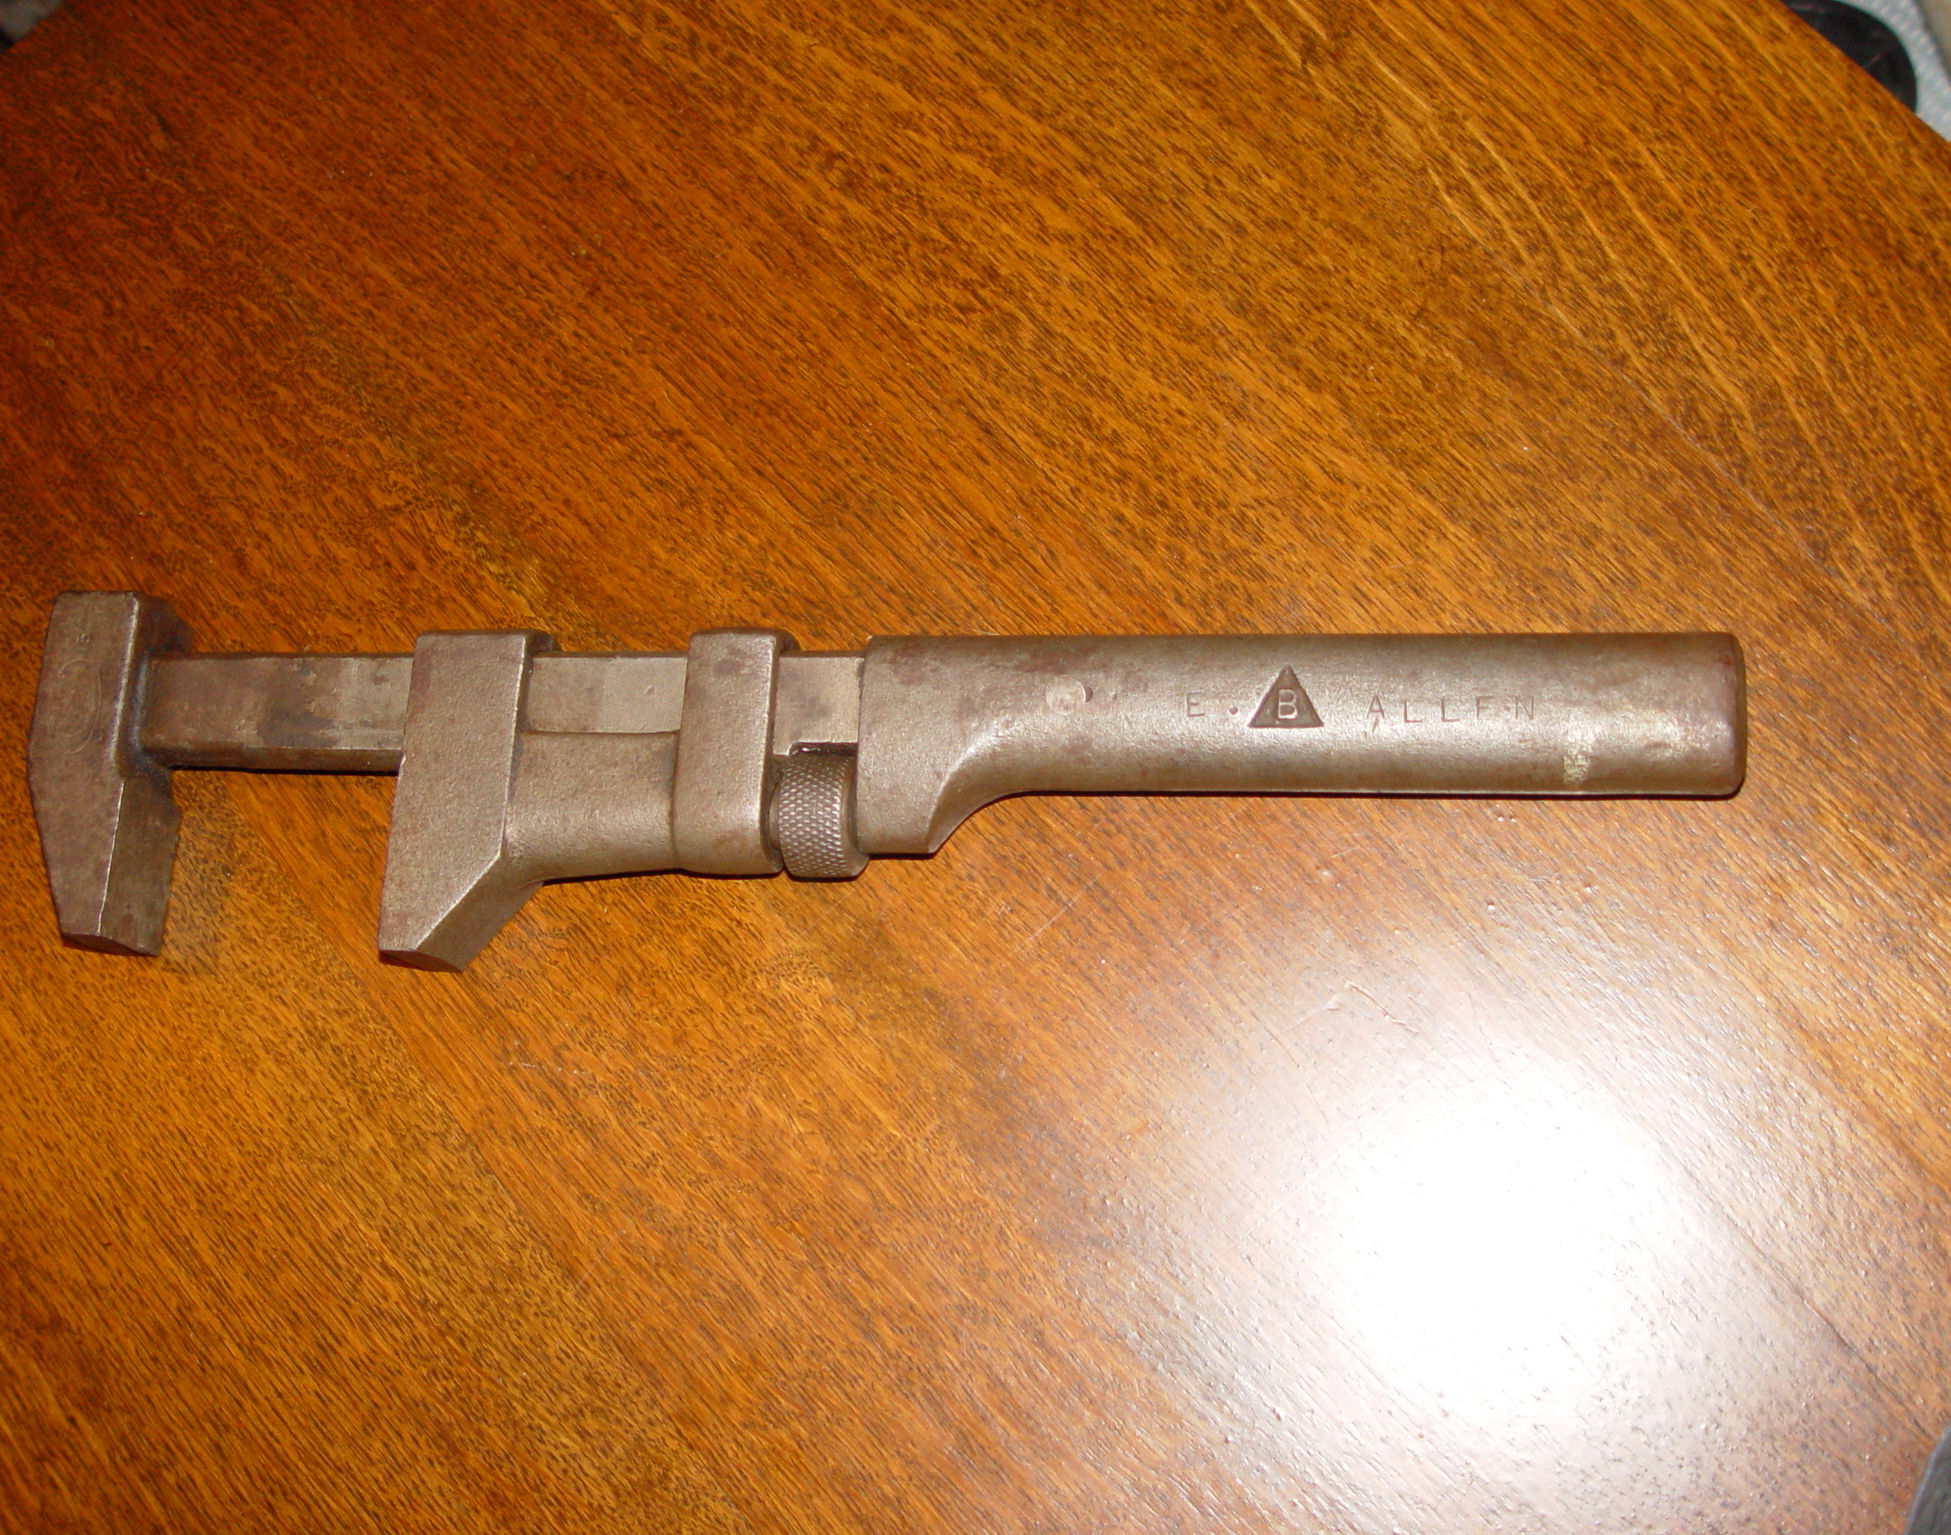 Early 20th c. Railroad Coes
                                        Adjustable B Steel 15 inch
                                        Monkey Wrench